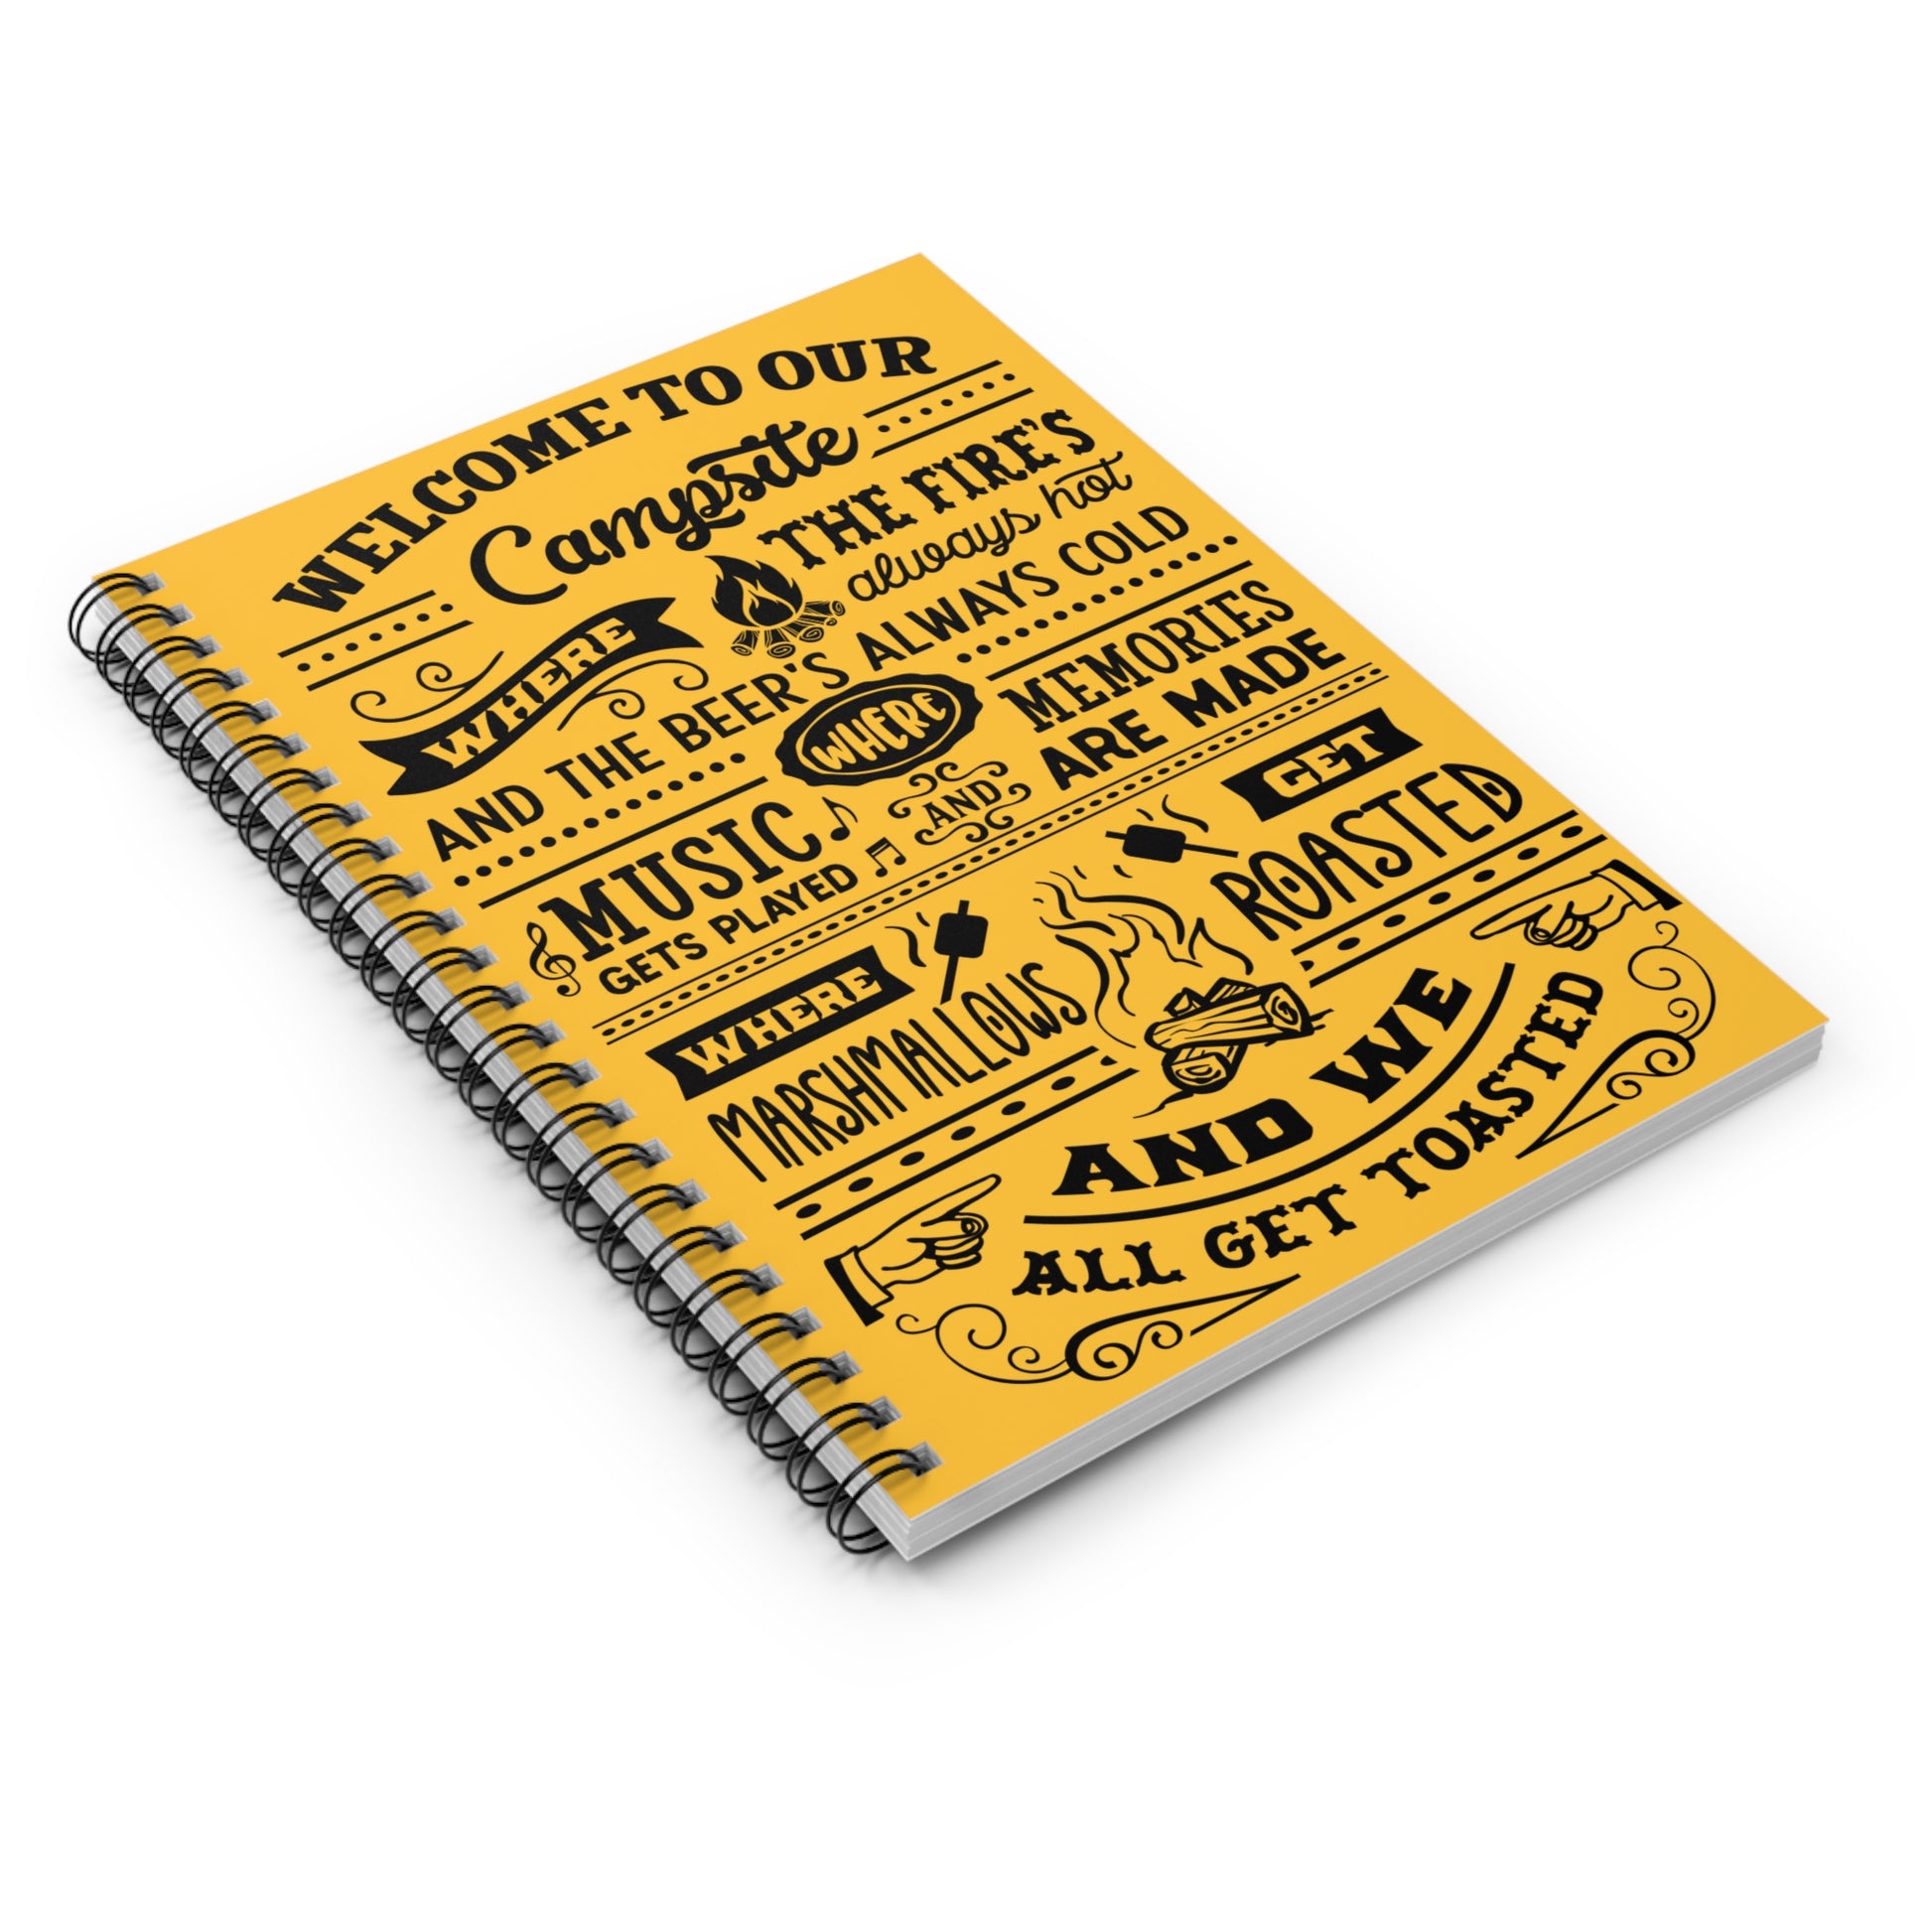 Campsite Rules: Spiral Notebook - Log Books - Journals - Diaries - and More Custom Printed by TheGlassyLass.com